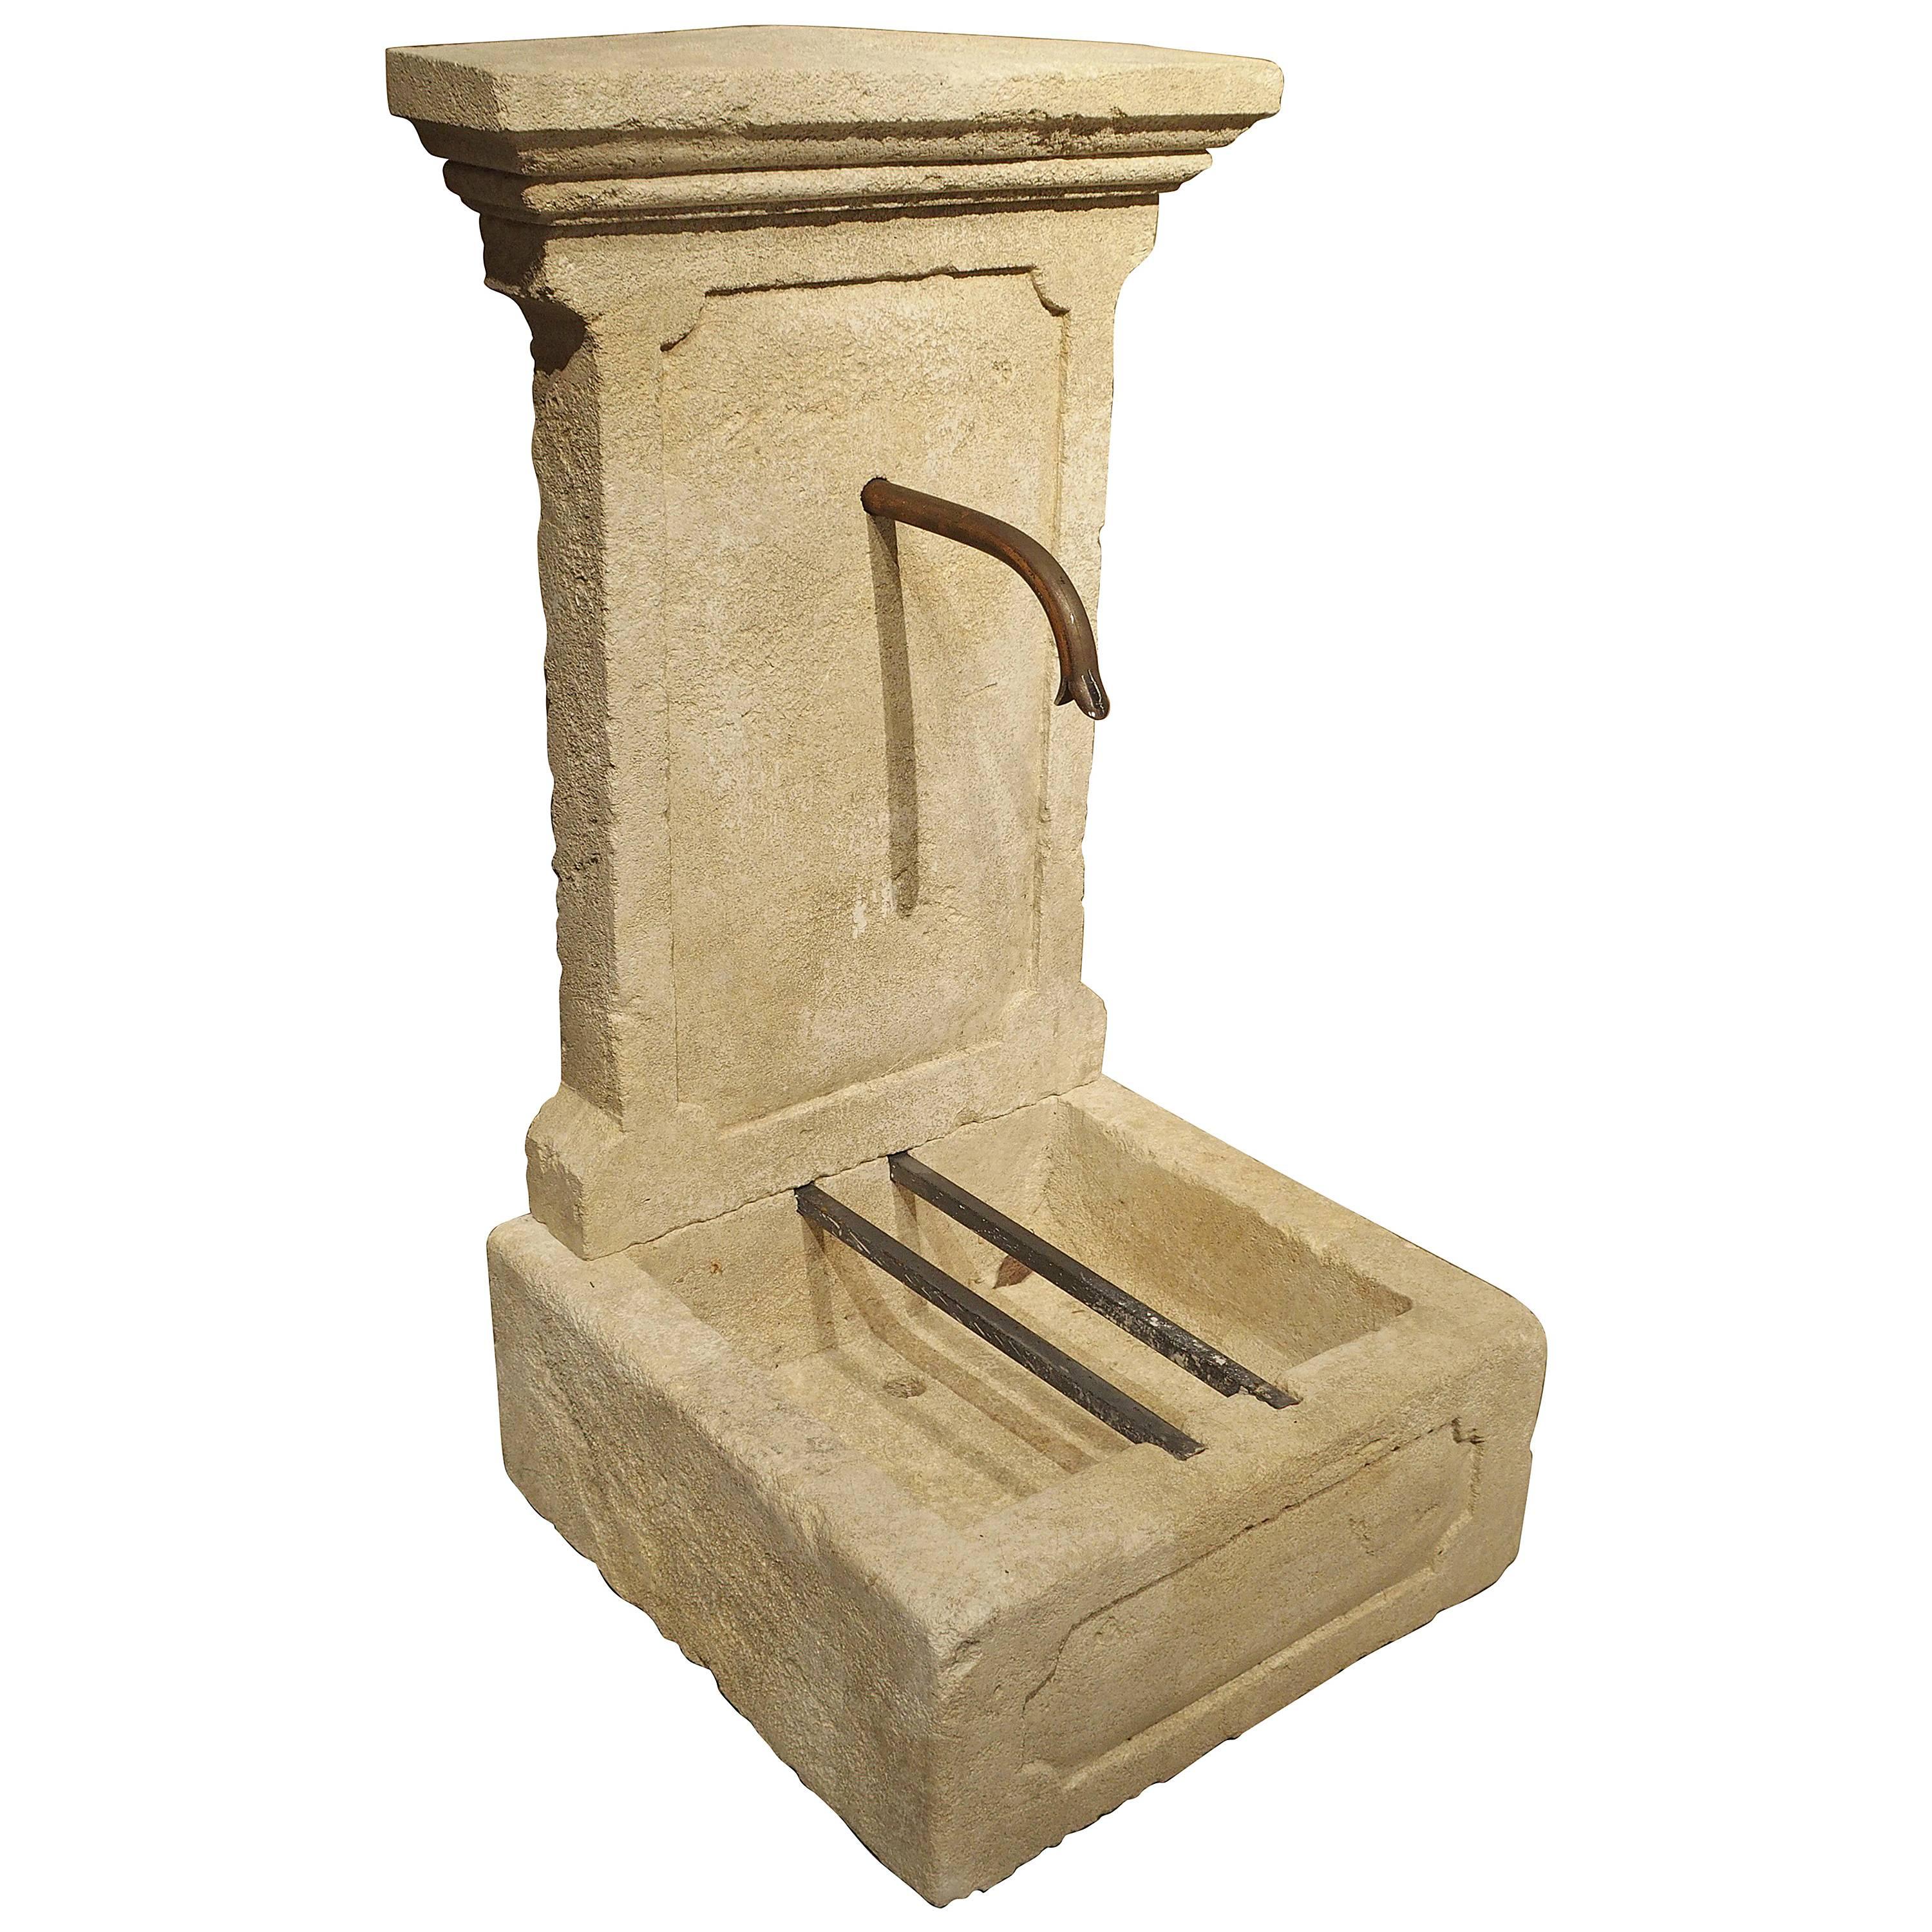 Small Limestone Wall Fountain from Provence, France